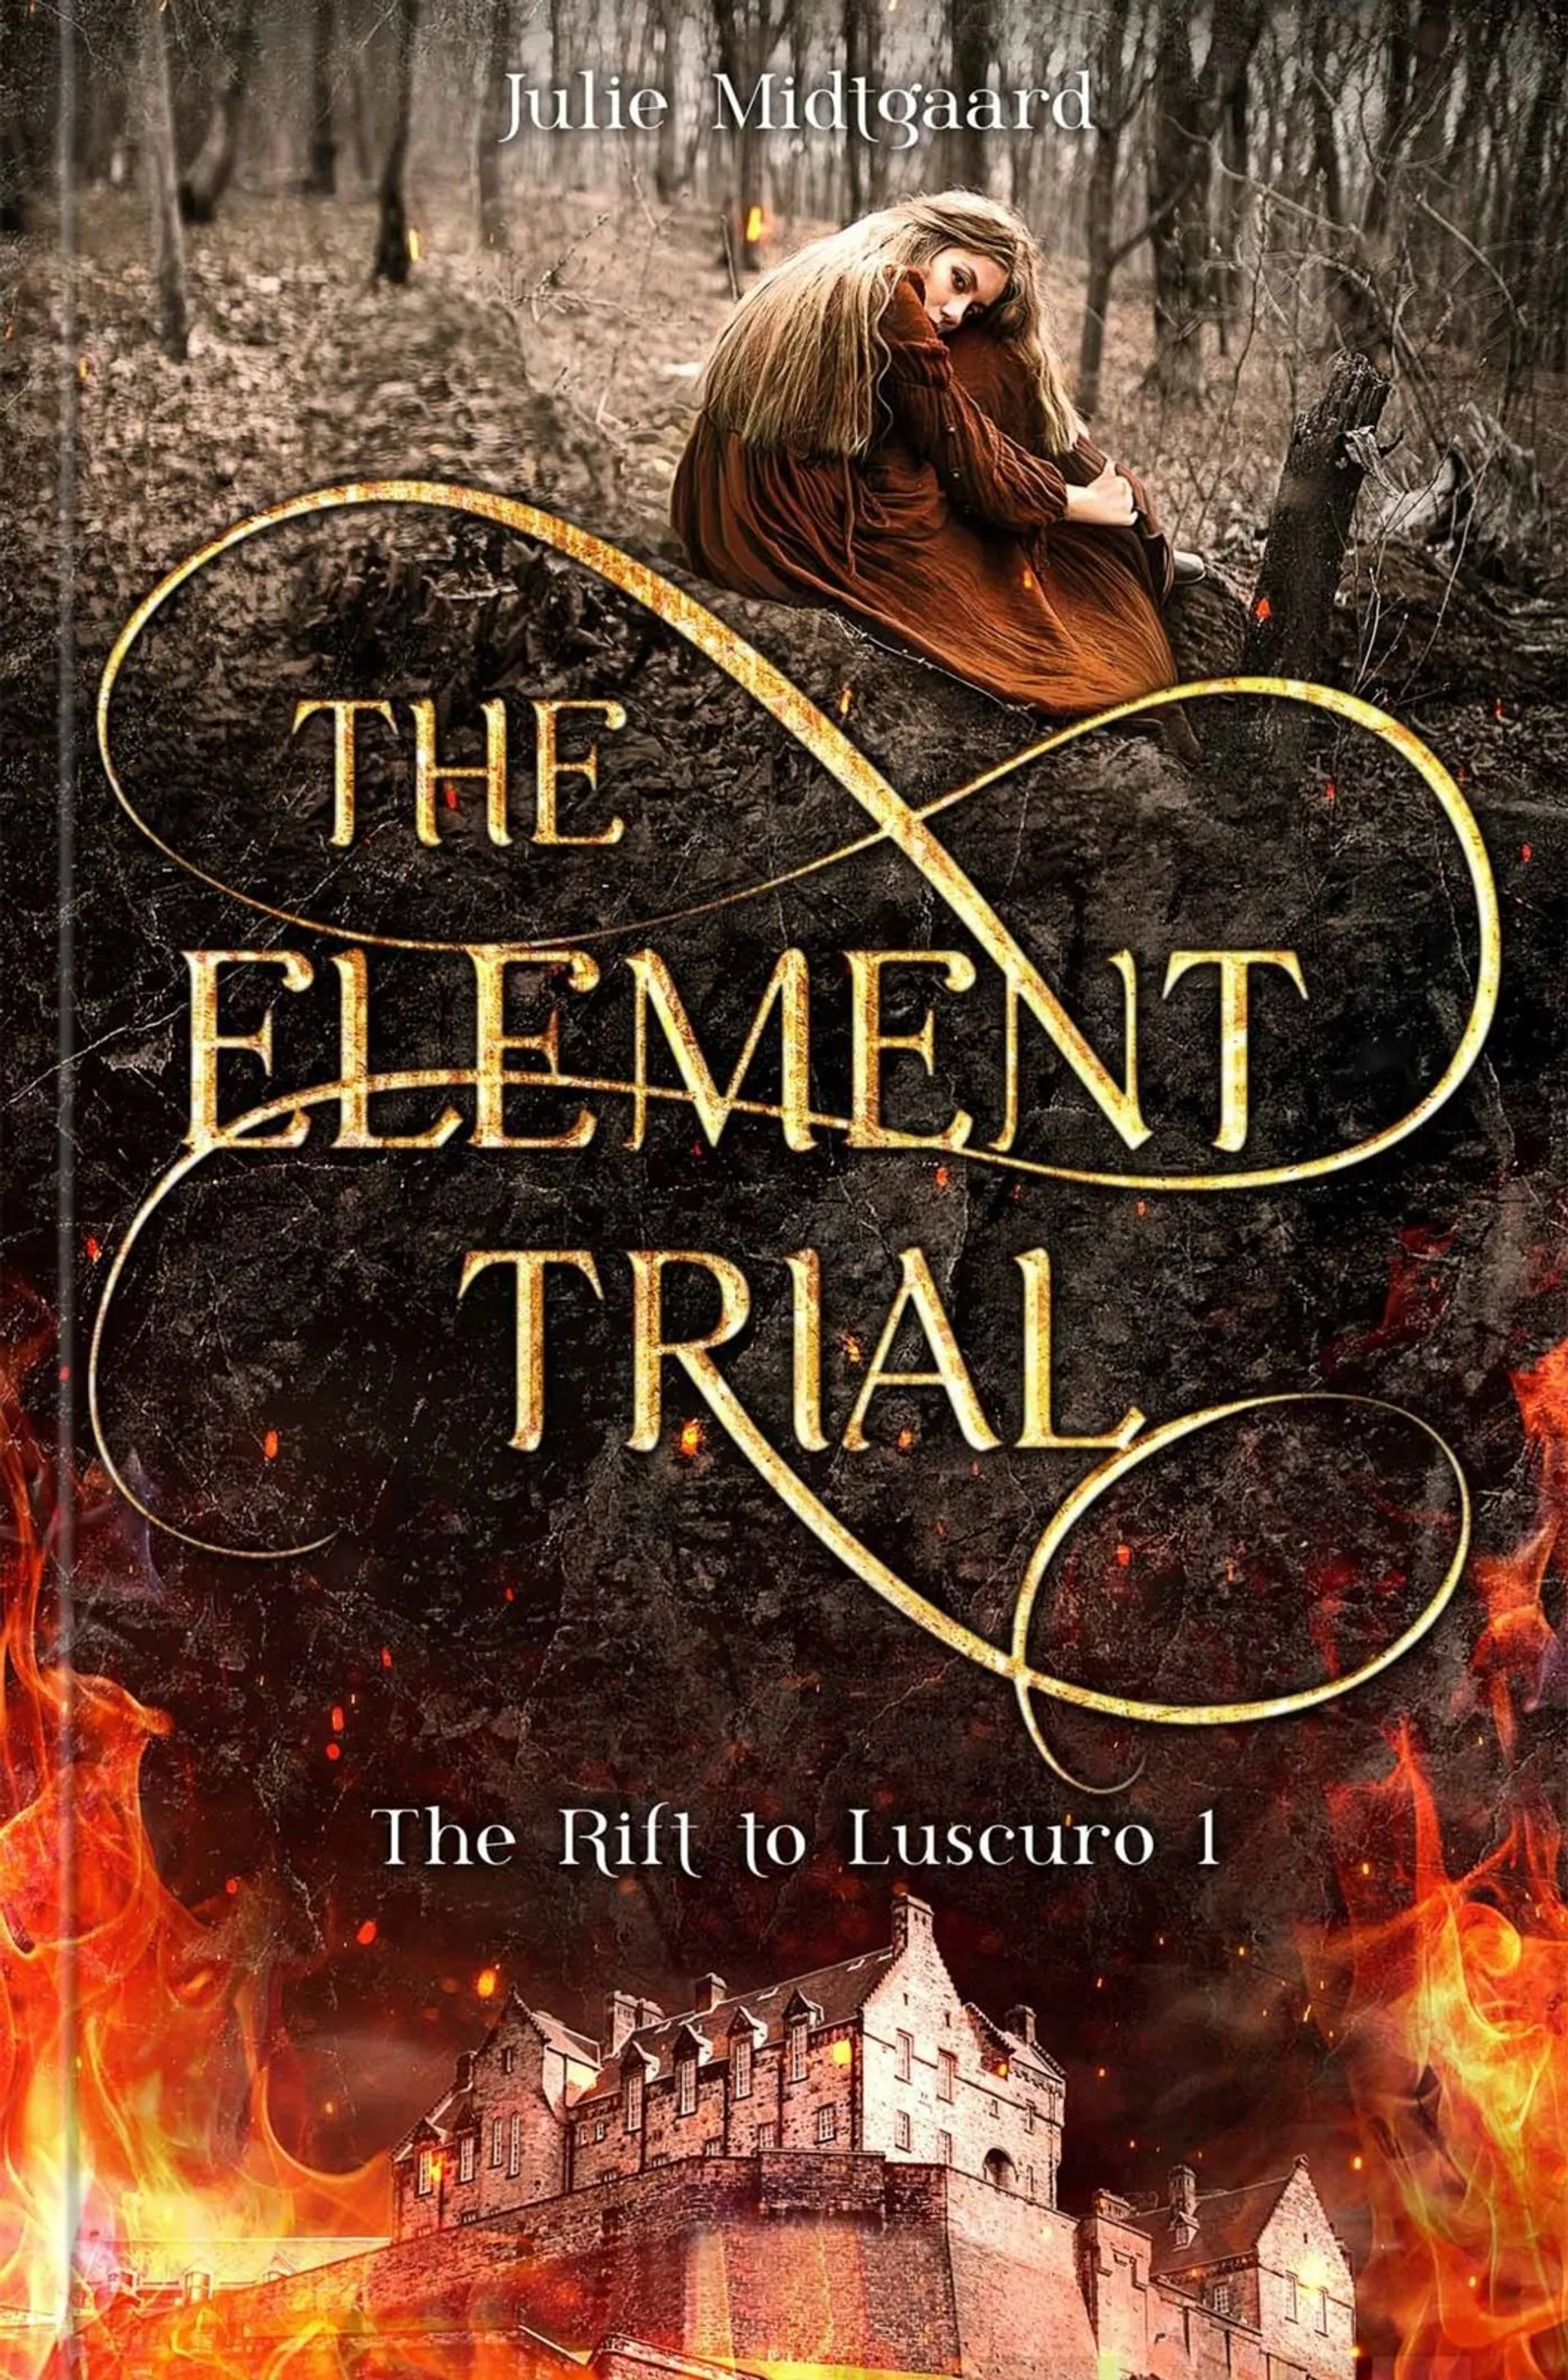 Midtgaard, The Element Trial